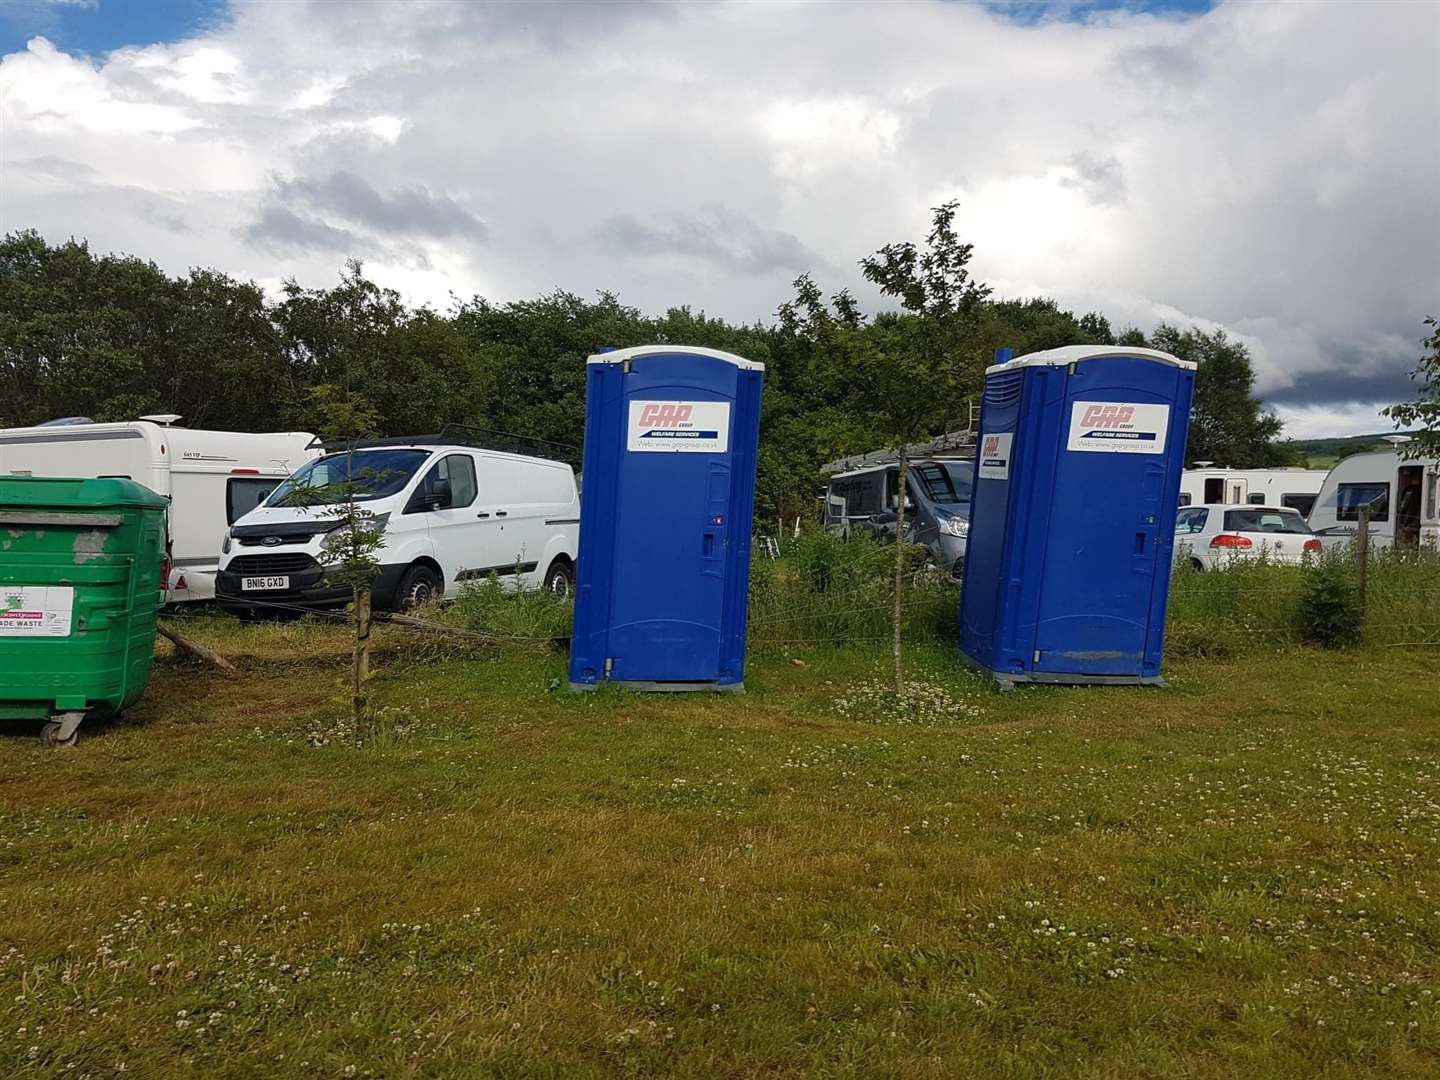 Moray Council have provided basic waste facilities at the site.